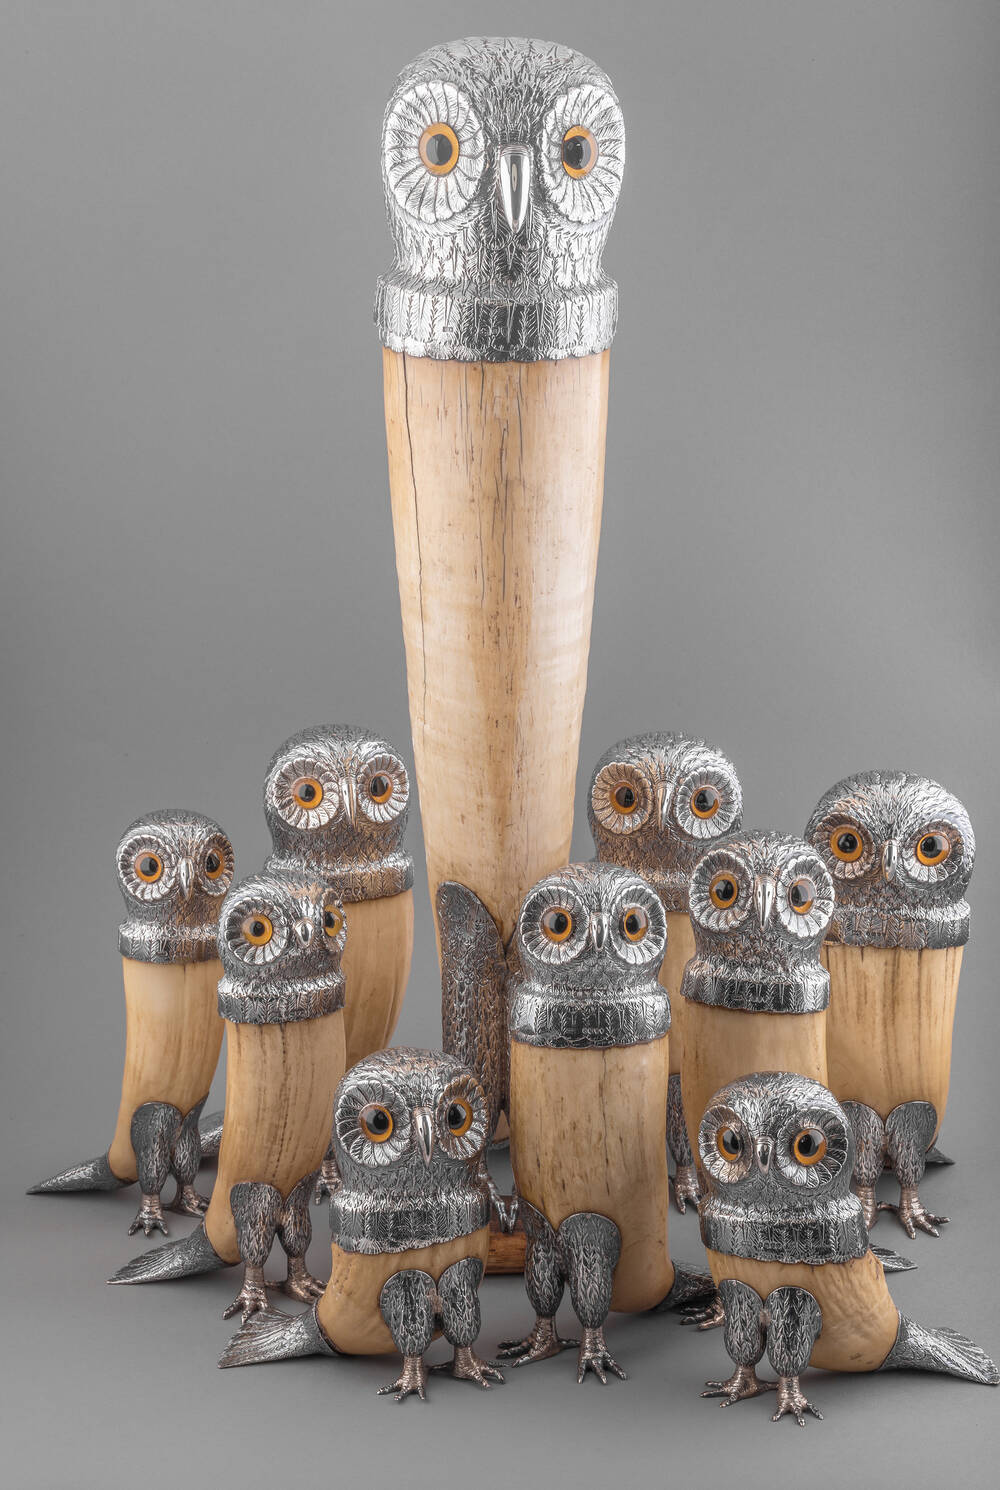 A group of 19th-century owl-shaped drinking horns, with 9 small owls and 1 very tall one.The bases are made from a light-brown horn, and all have a silver owl head on top, with orange eyes.